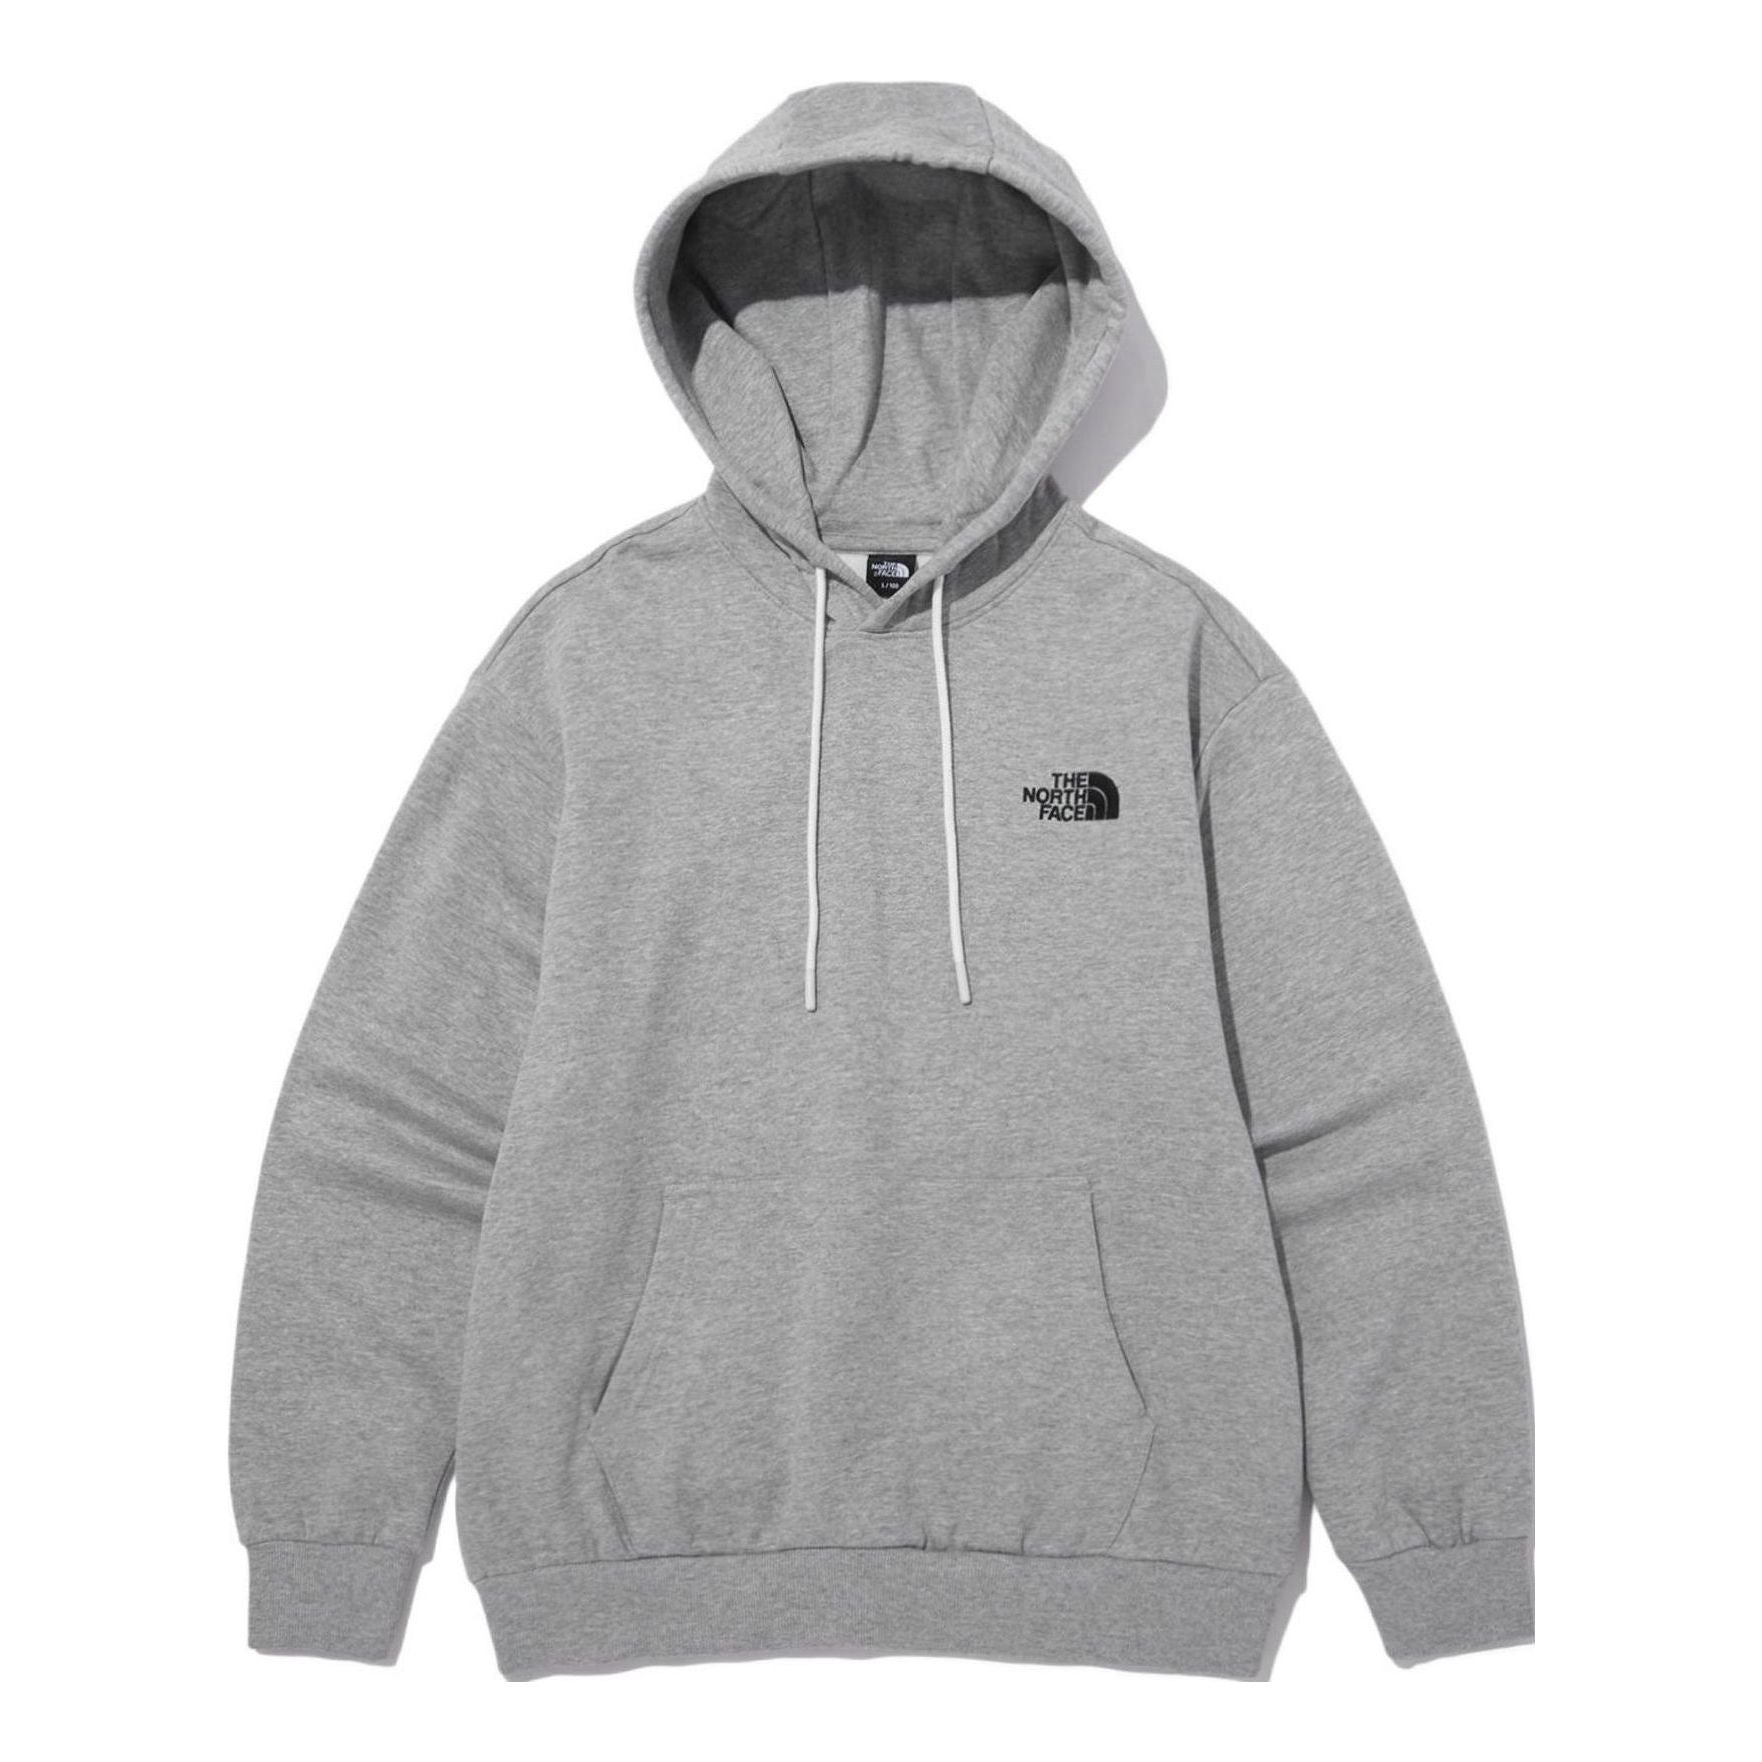 THE NORTH FACE Street Style Hoodie 'Grey' NM5PN90C - 1